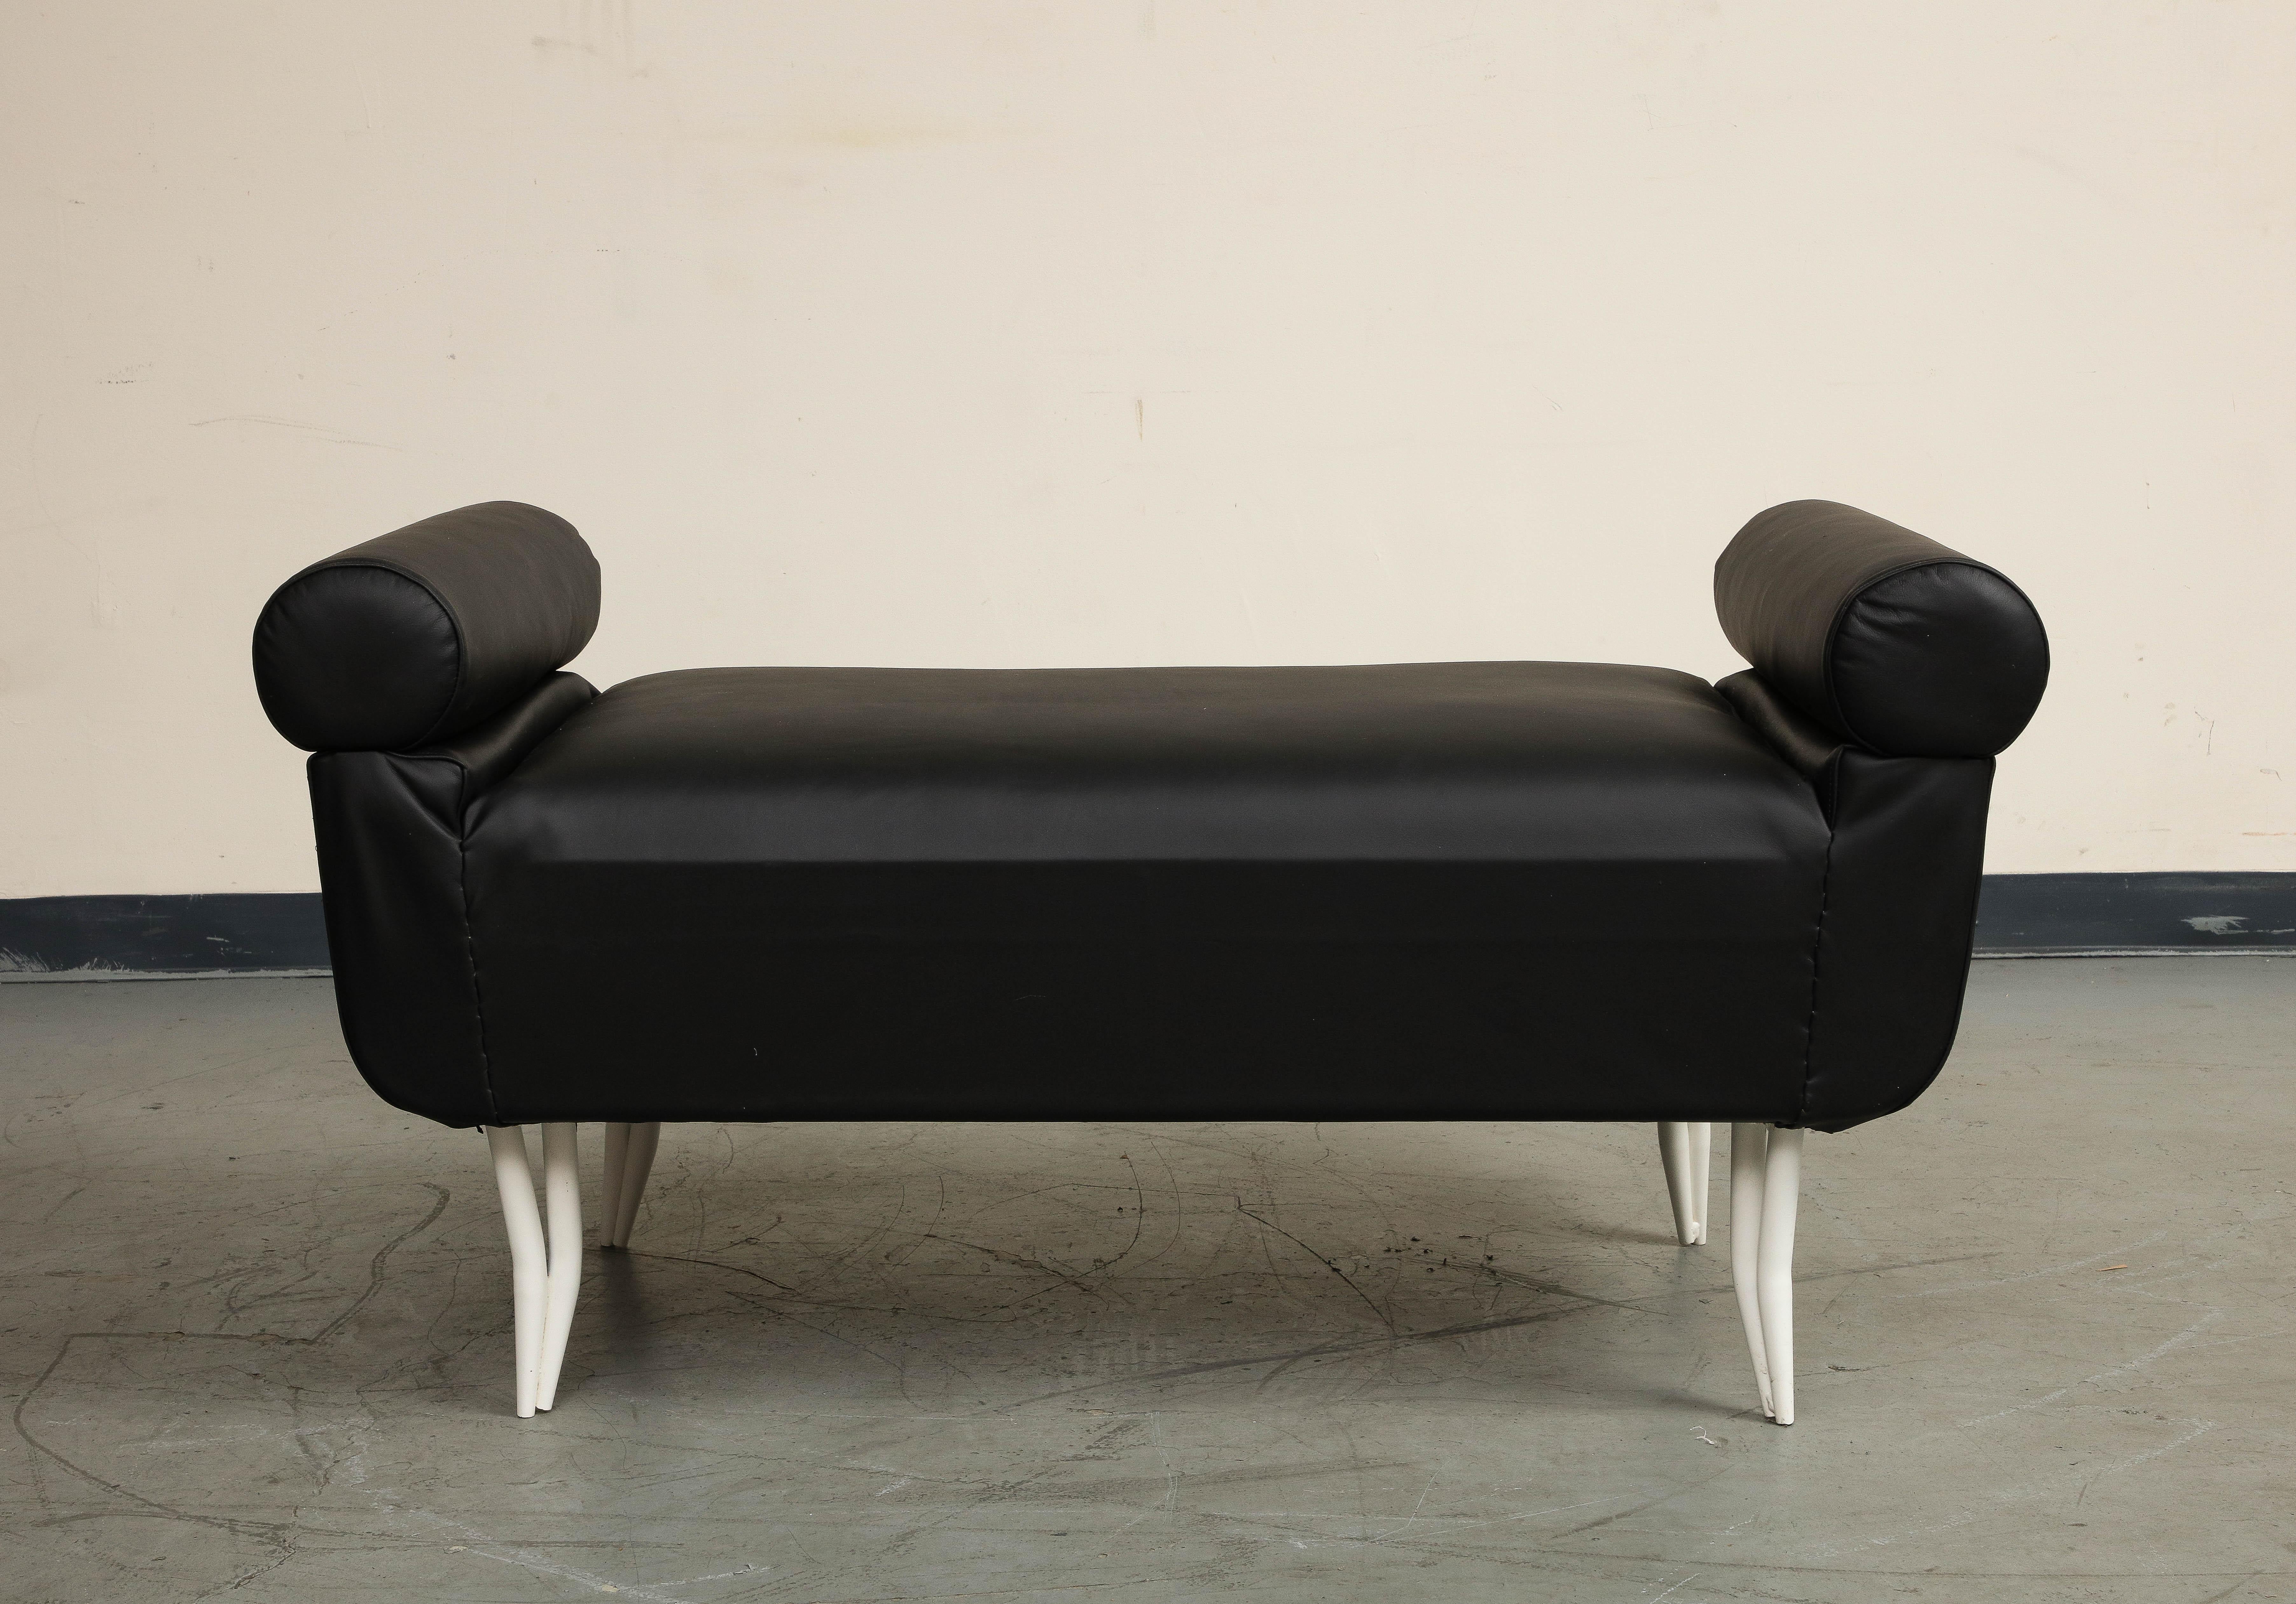 French 1960s Rene Prou Style White Painted Iron & Black Leather Daybed or Bench For Sale 4